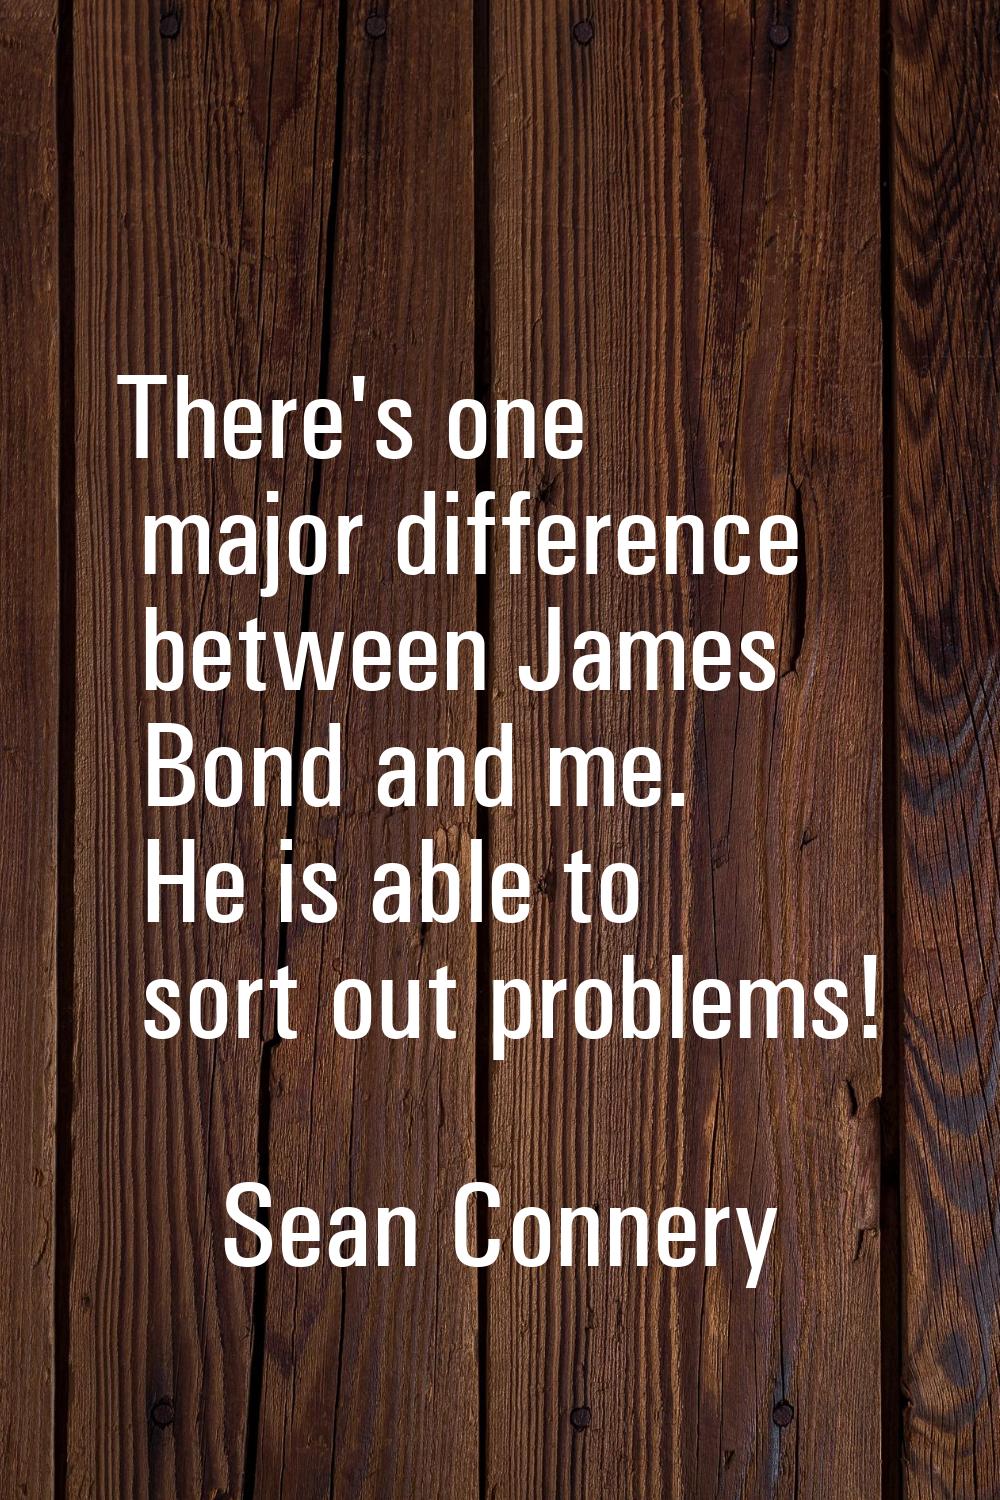 There's one major difference between James Bond and me. He is able to sort out problems!